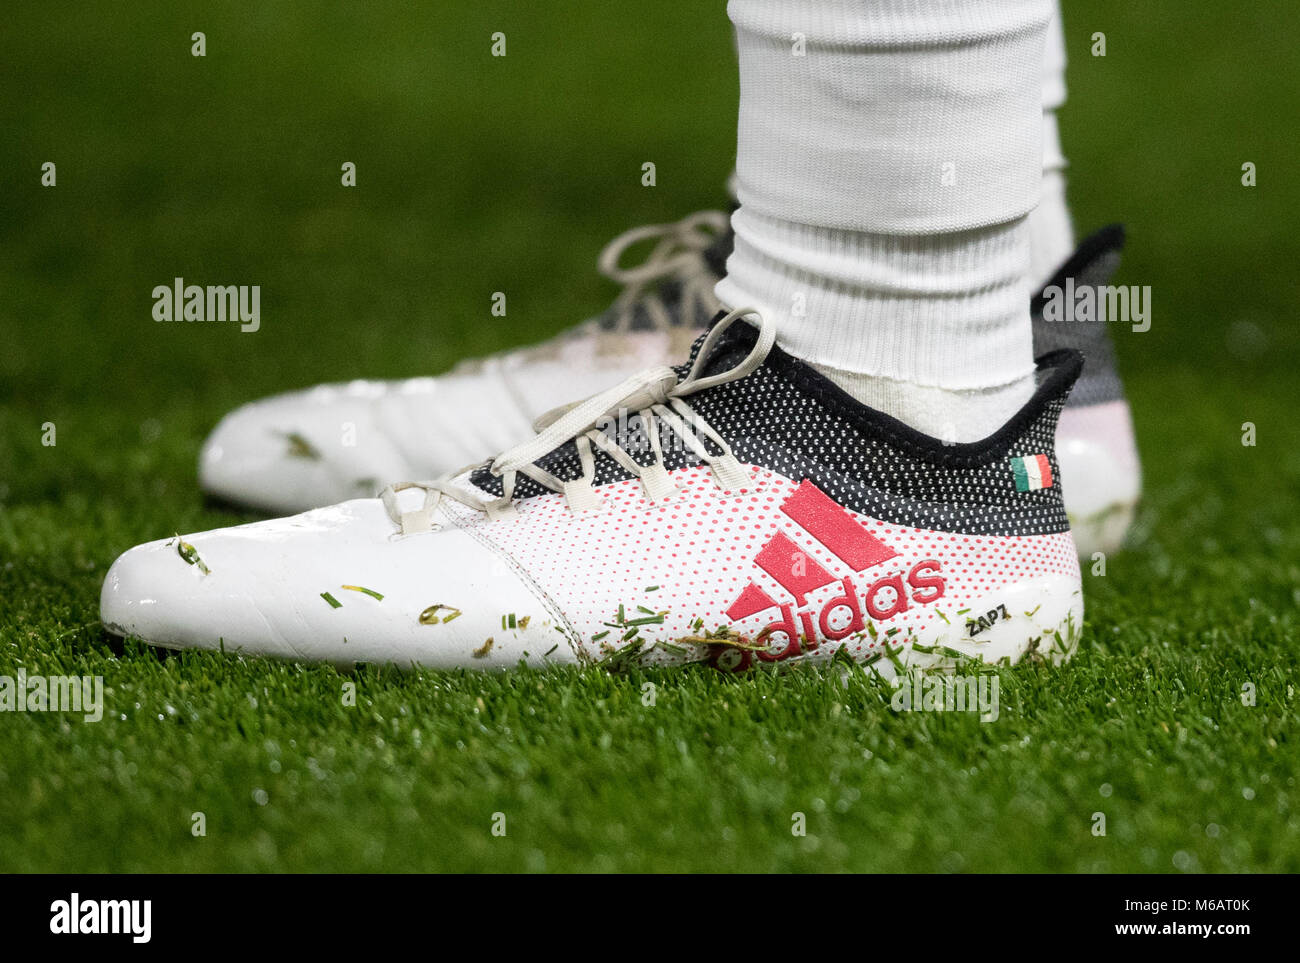 The Adidas football boots of David Zappacosta of Chelsea displaying ZAP7 & the Italy flag  ahead of the Premier League match between Watford and Chels Stock Photo